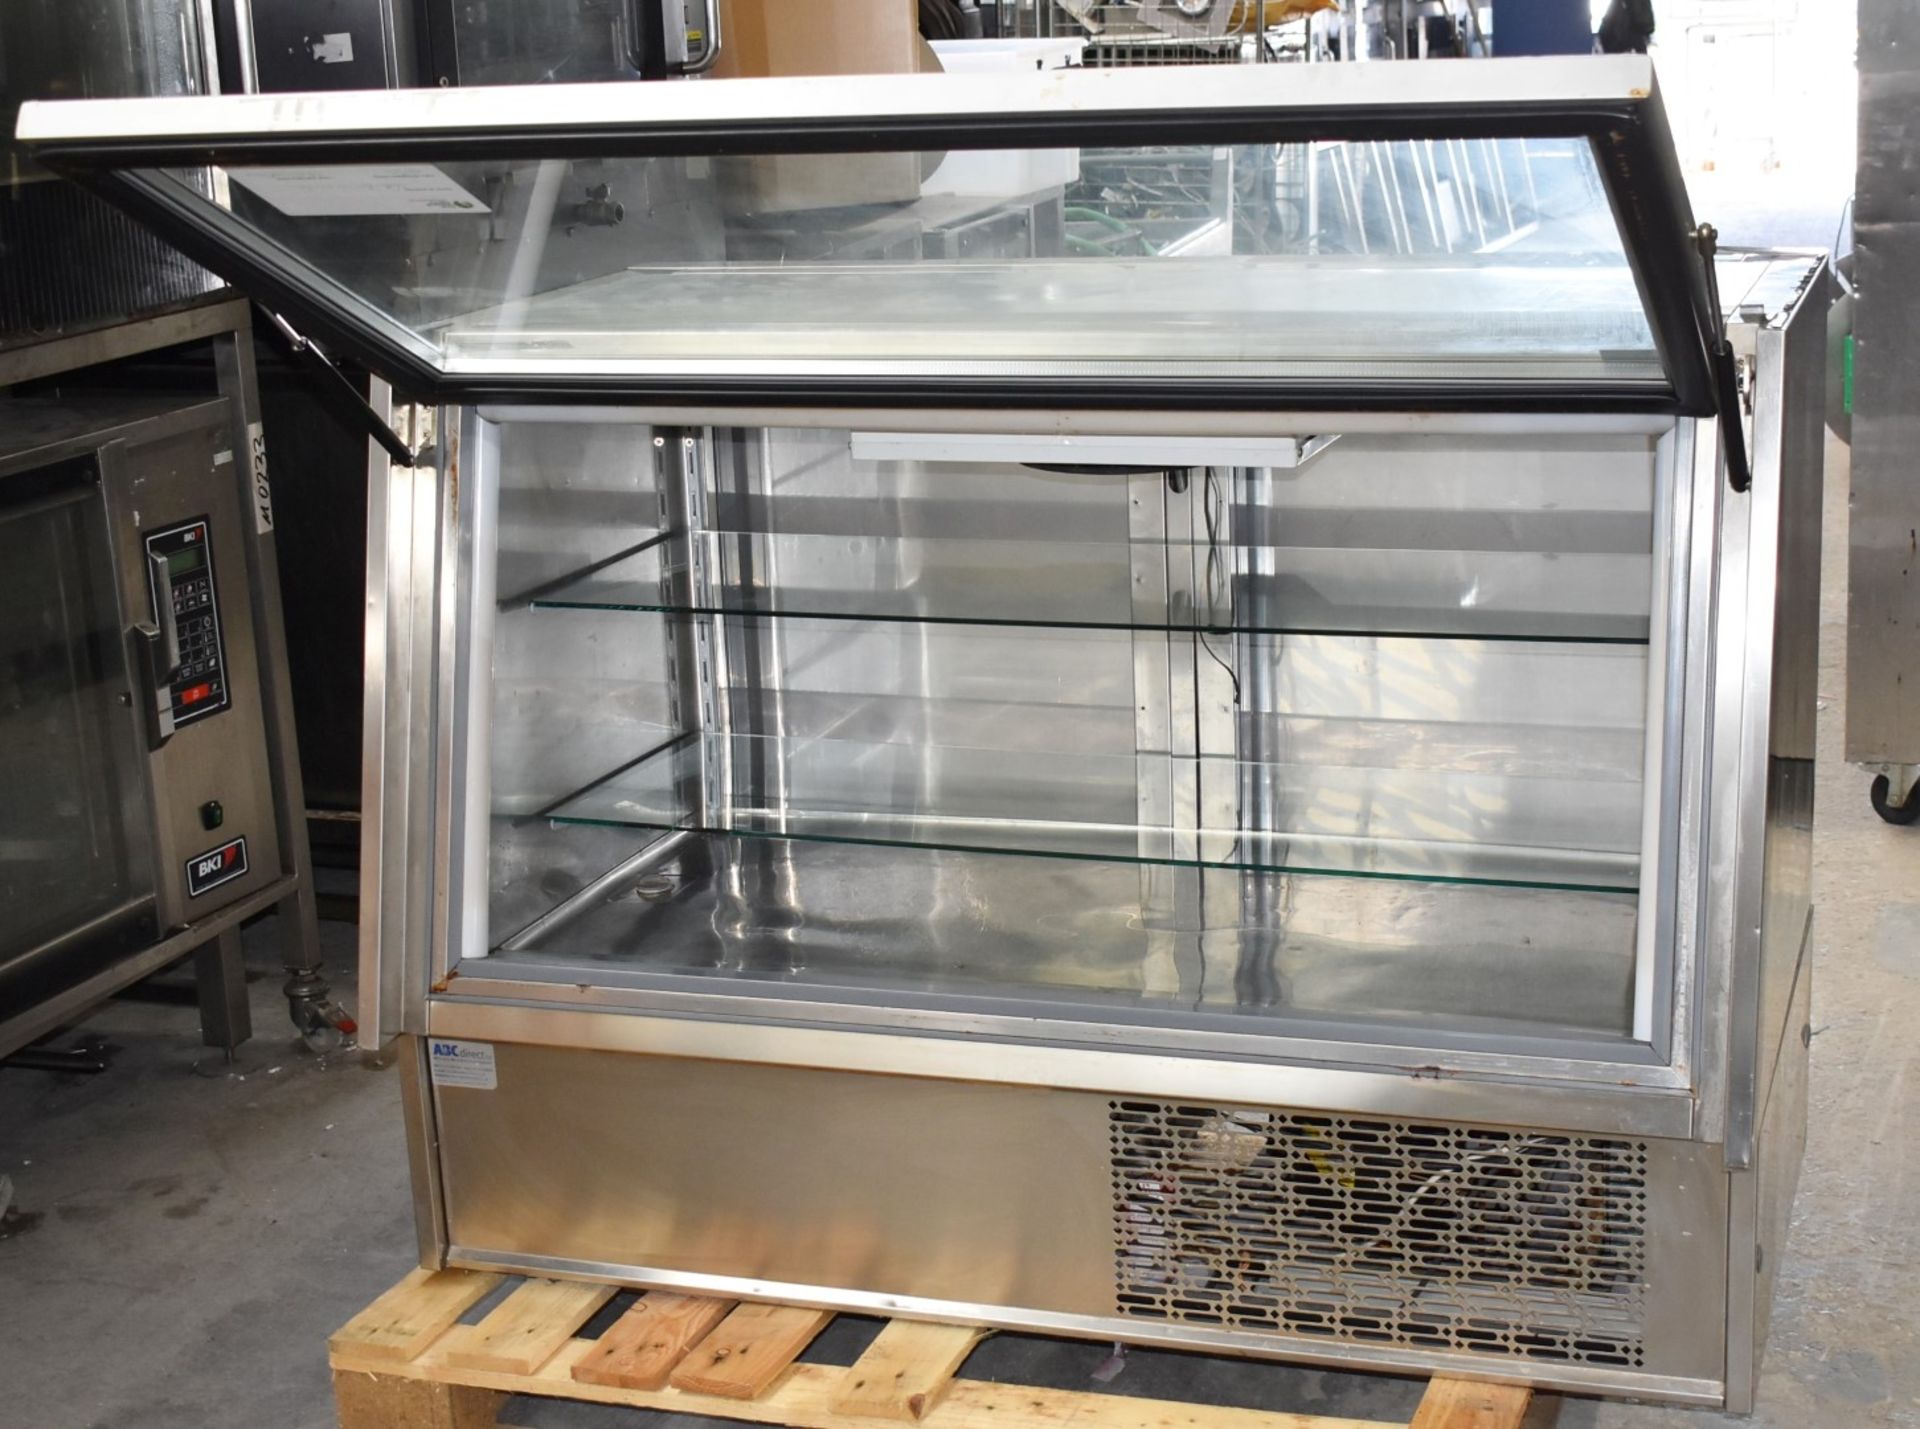 1 x Infrico 1.4m Refrigerated Vision Counter For Takeaways, Sandwich Shops or Cafes - RRP £3,200! - Image 20 of 21